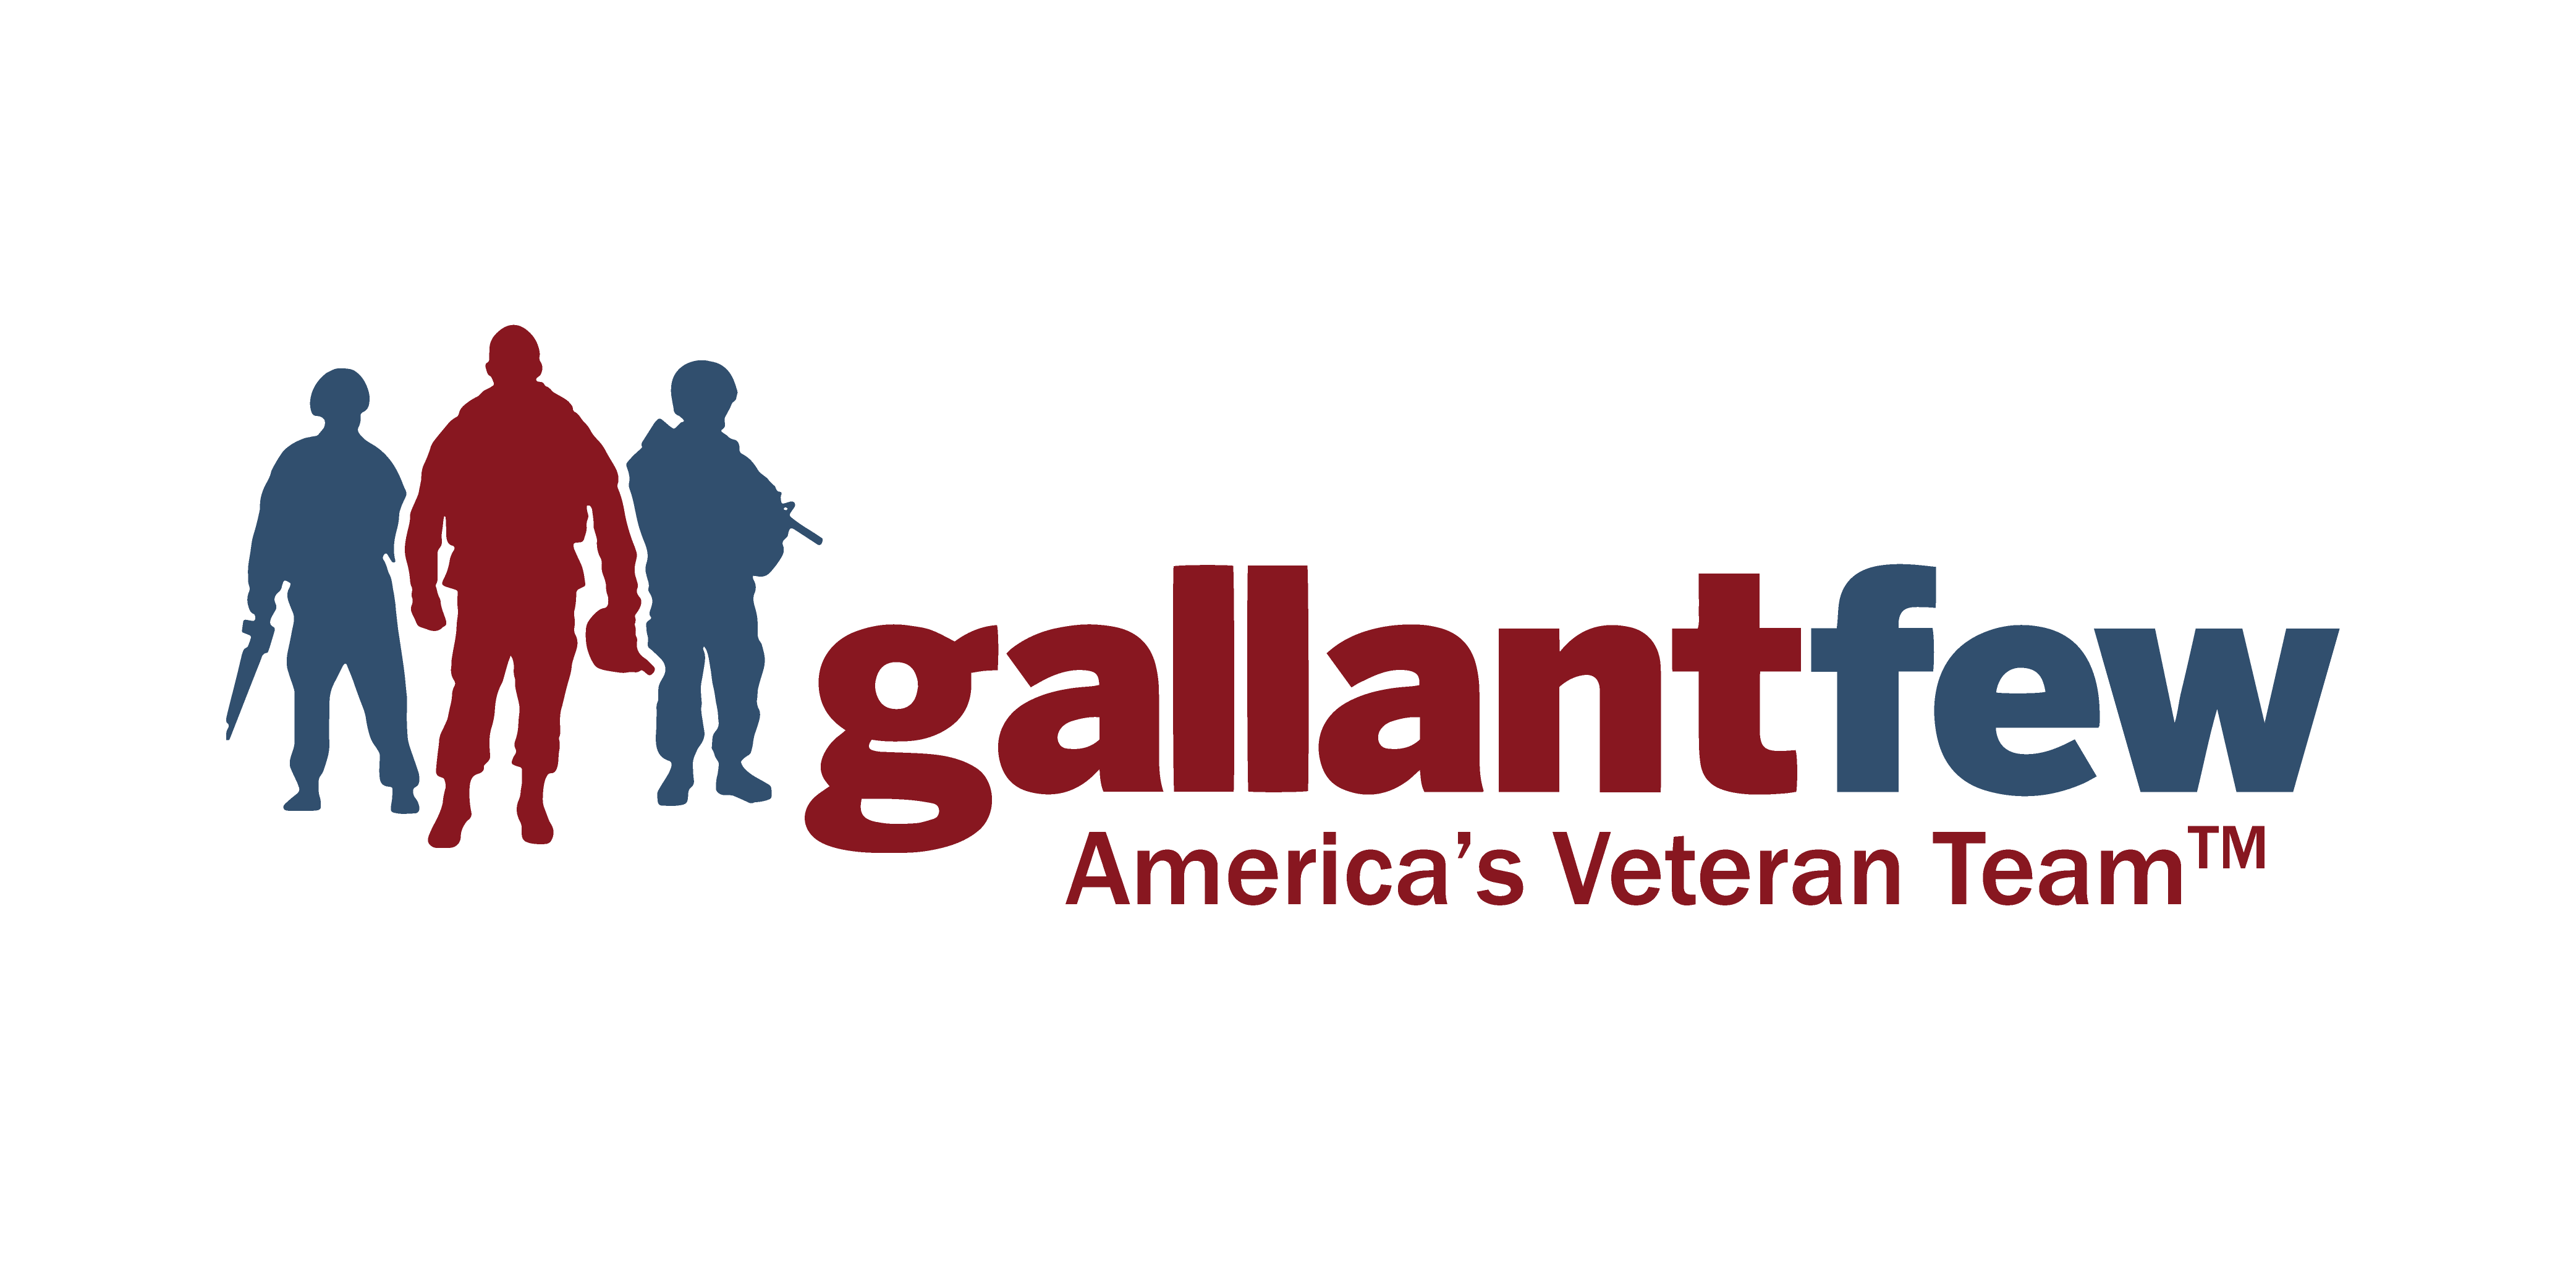 GallantFew primary logo - name with tagline and three soldiers next to name